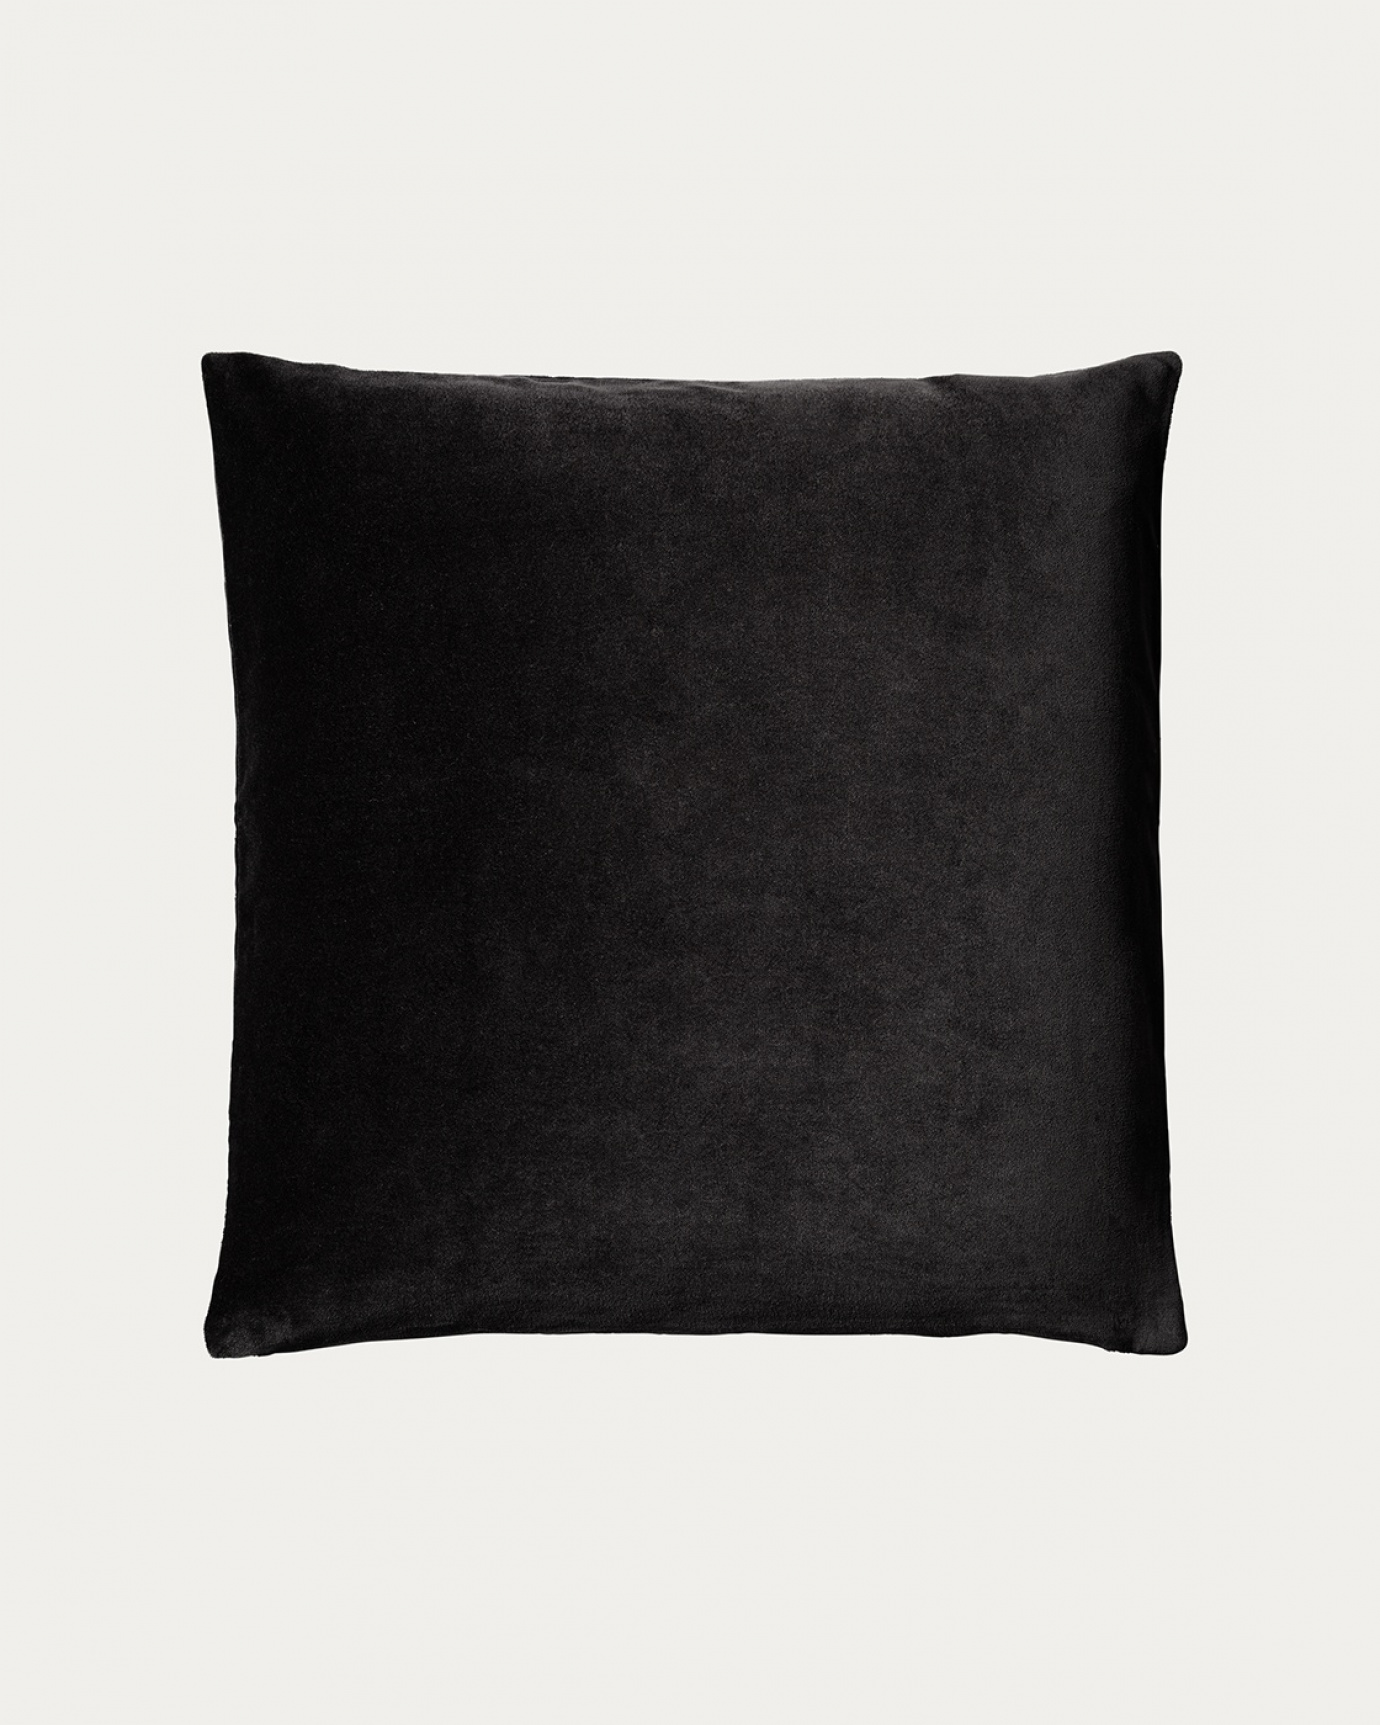 Product image black PAOLO cushion cover in soft organic cotton velvet from LINUM DESIGN. Size 50x50 cm.